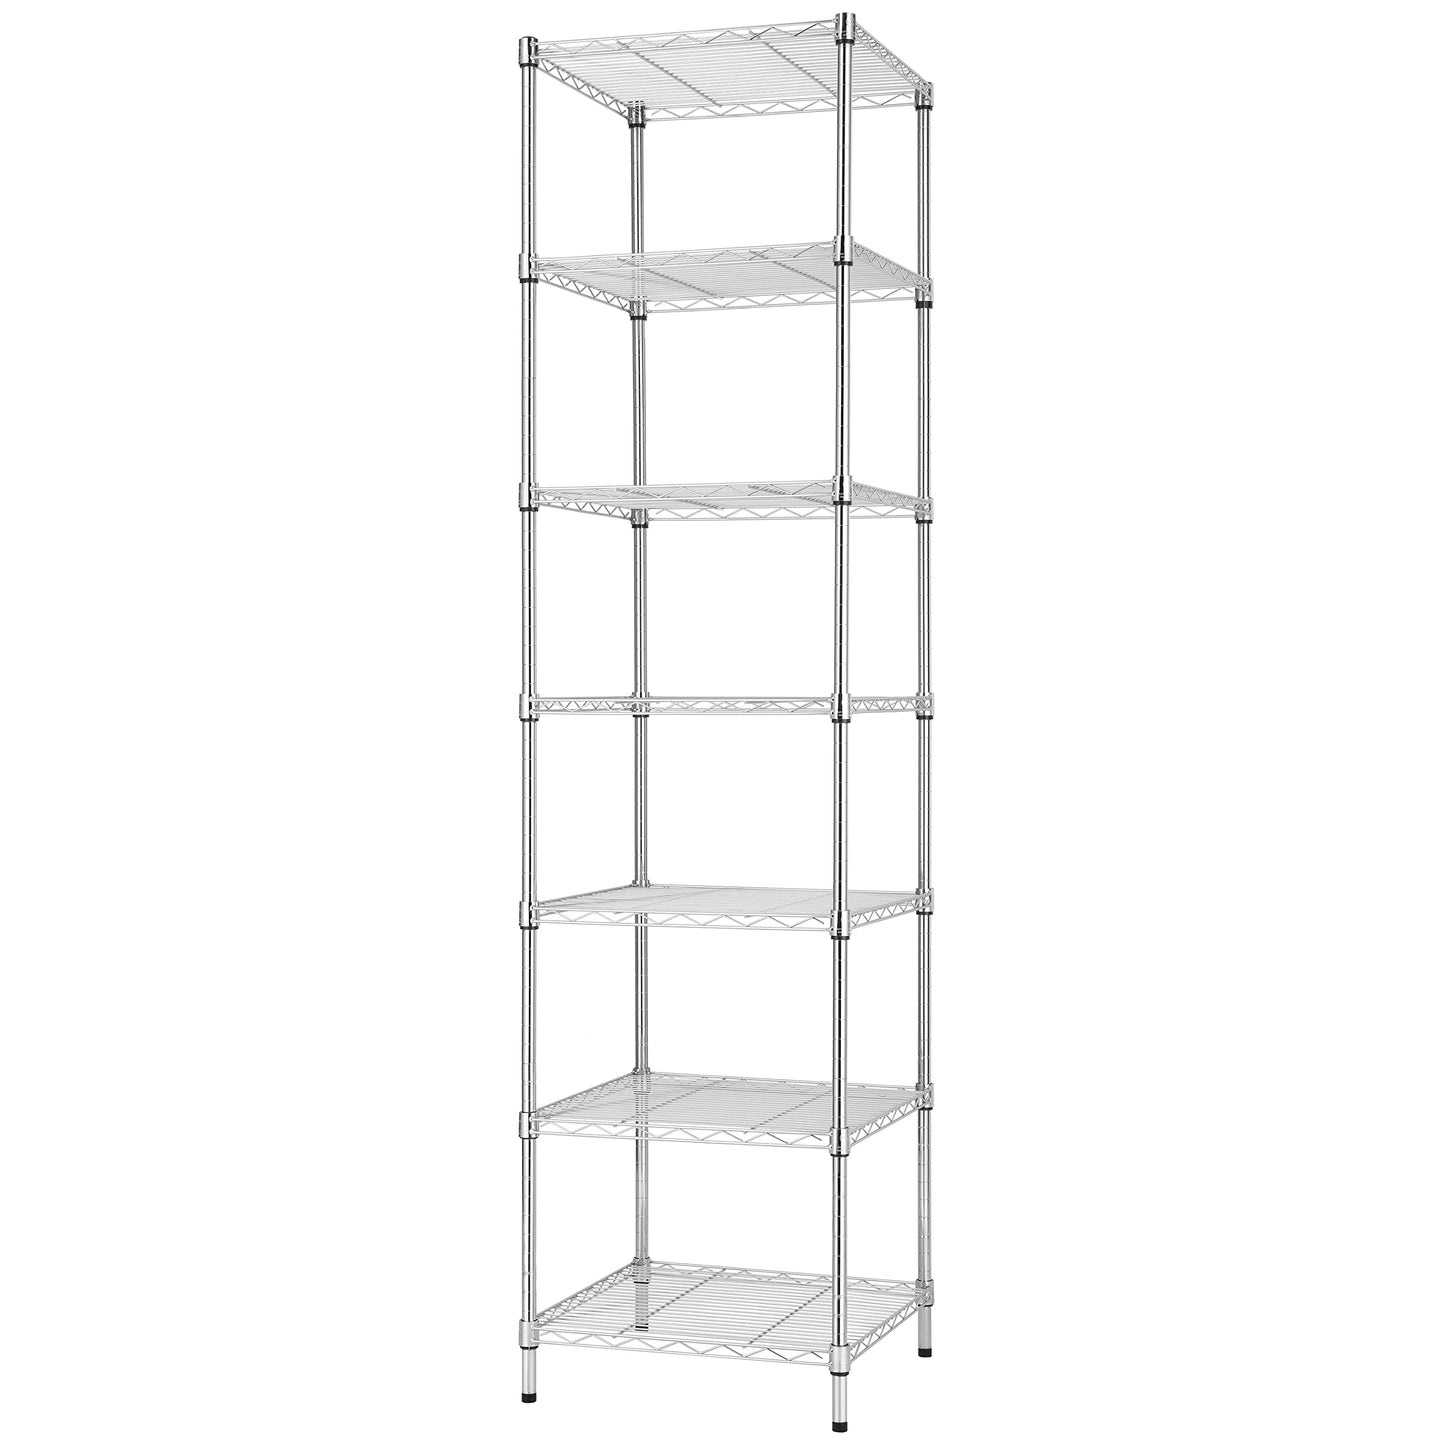 Finnhomy Heavy Duty 7 Tier Wire Shelving, 18x18x72 inches 7 Shelves Storage Rack with Thicken Steel Tube, Pantry Shelves for Storage, Adjustable